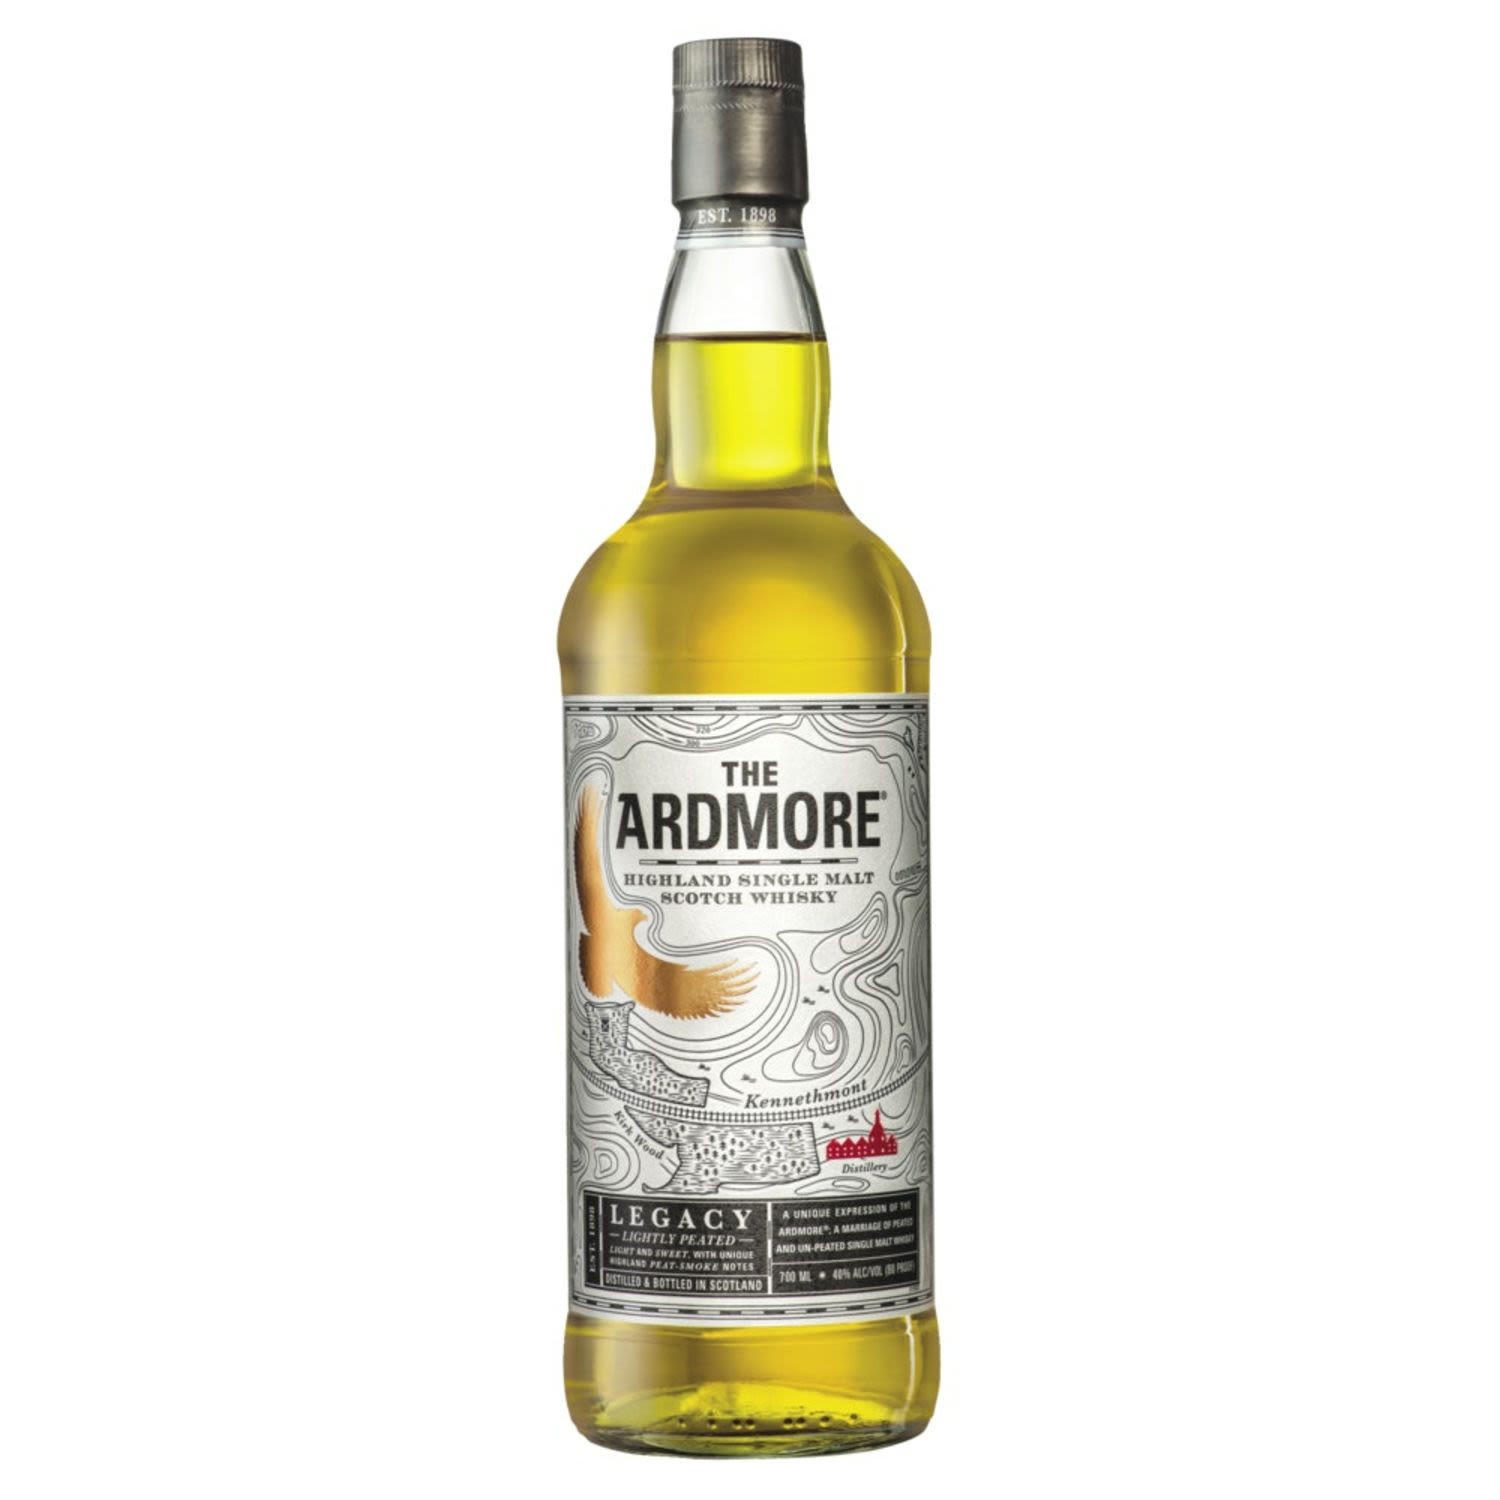 Released in 2014 to take the place of the Ardmore Traditional, the Legacy brings a lightly-peated, wood spice-led flavour profile to the table. At its core, the Ardmore Legacy is made with 80% peated and 20% unpeated malt.<br /> <br />Alcohol Volume: 40.00%<br /><br />Pack Format: Bottle<br /><br />Standard Drinks: 22.1</br /><br />Pack Type: Bottle<br /><br />Country of Origin: Scotland<br />